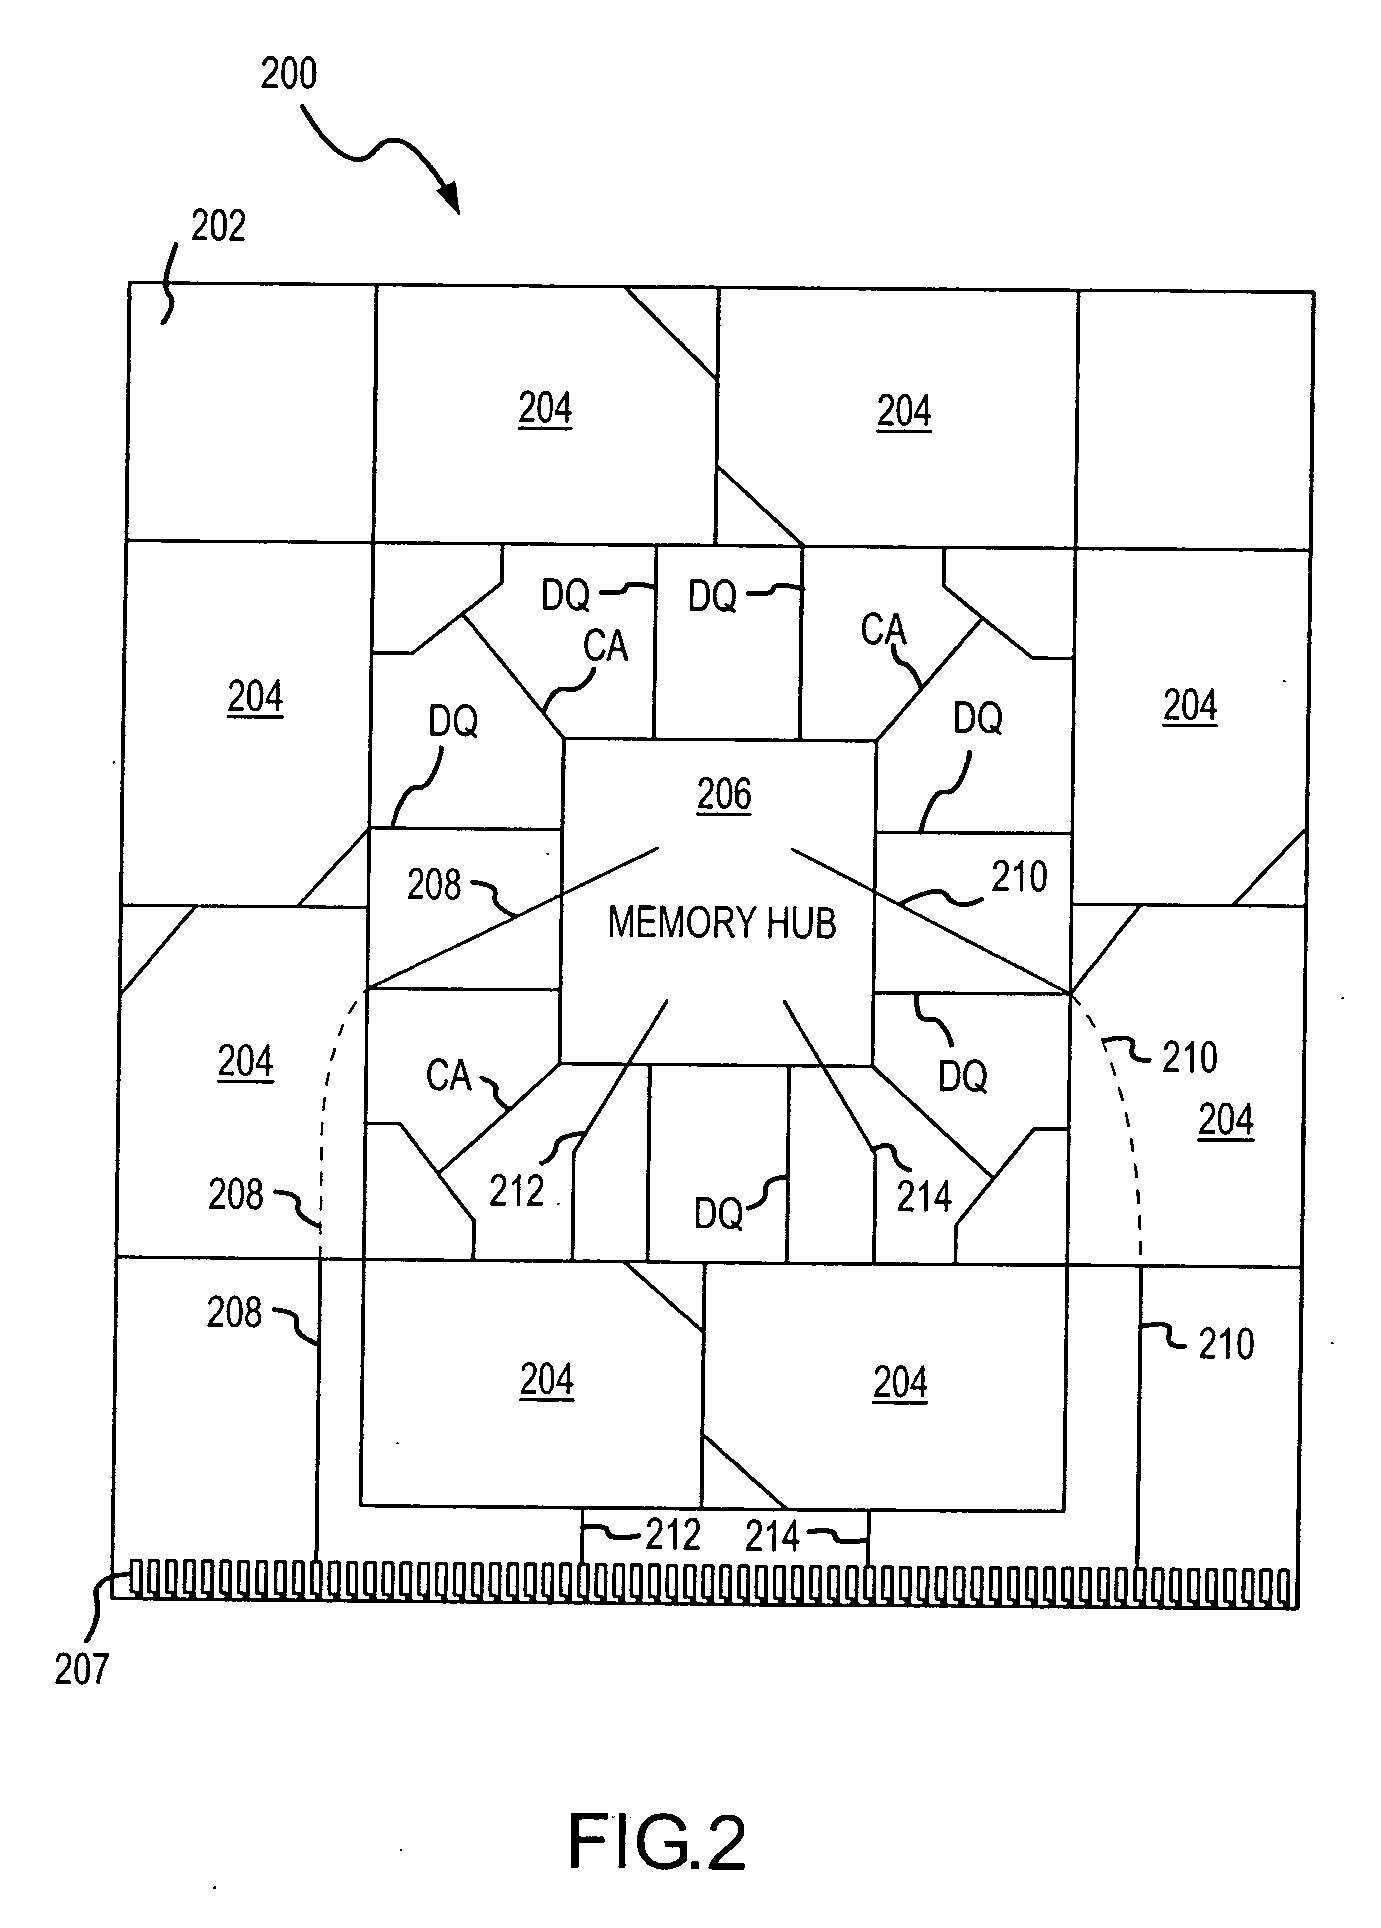 System and method for optimizing interconnections of components in a multichip memory module